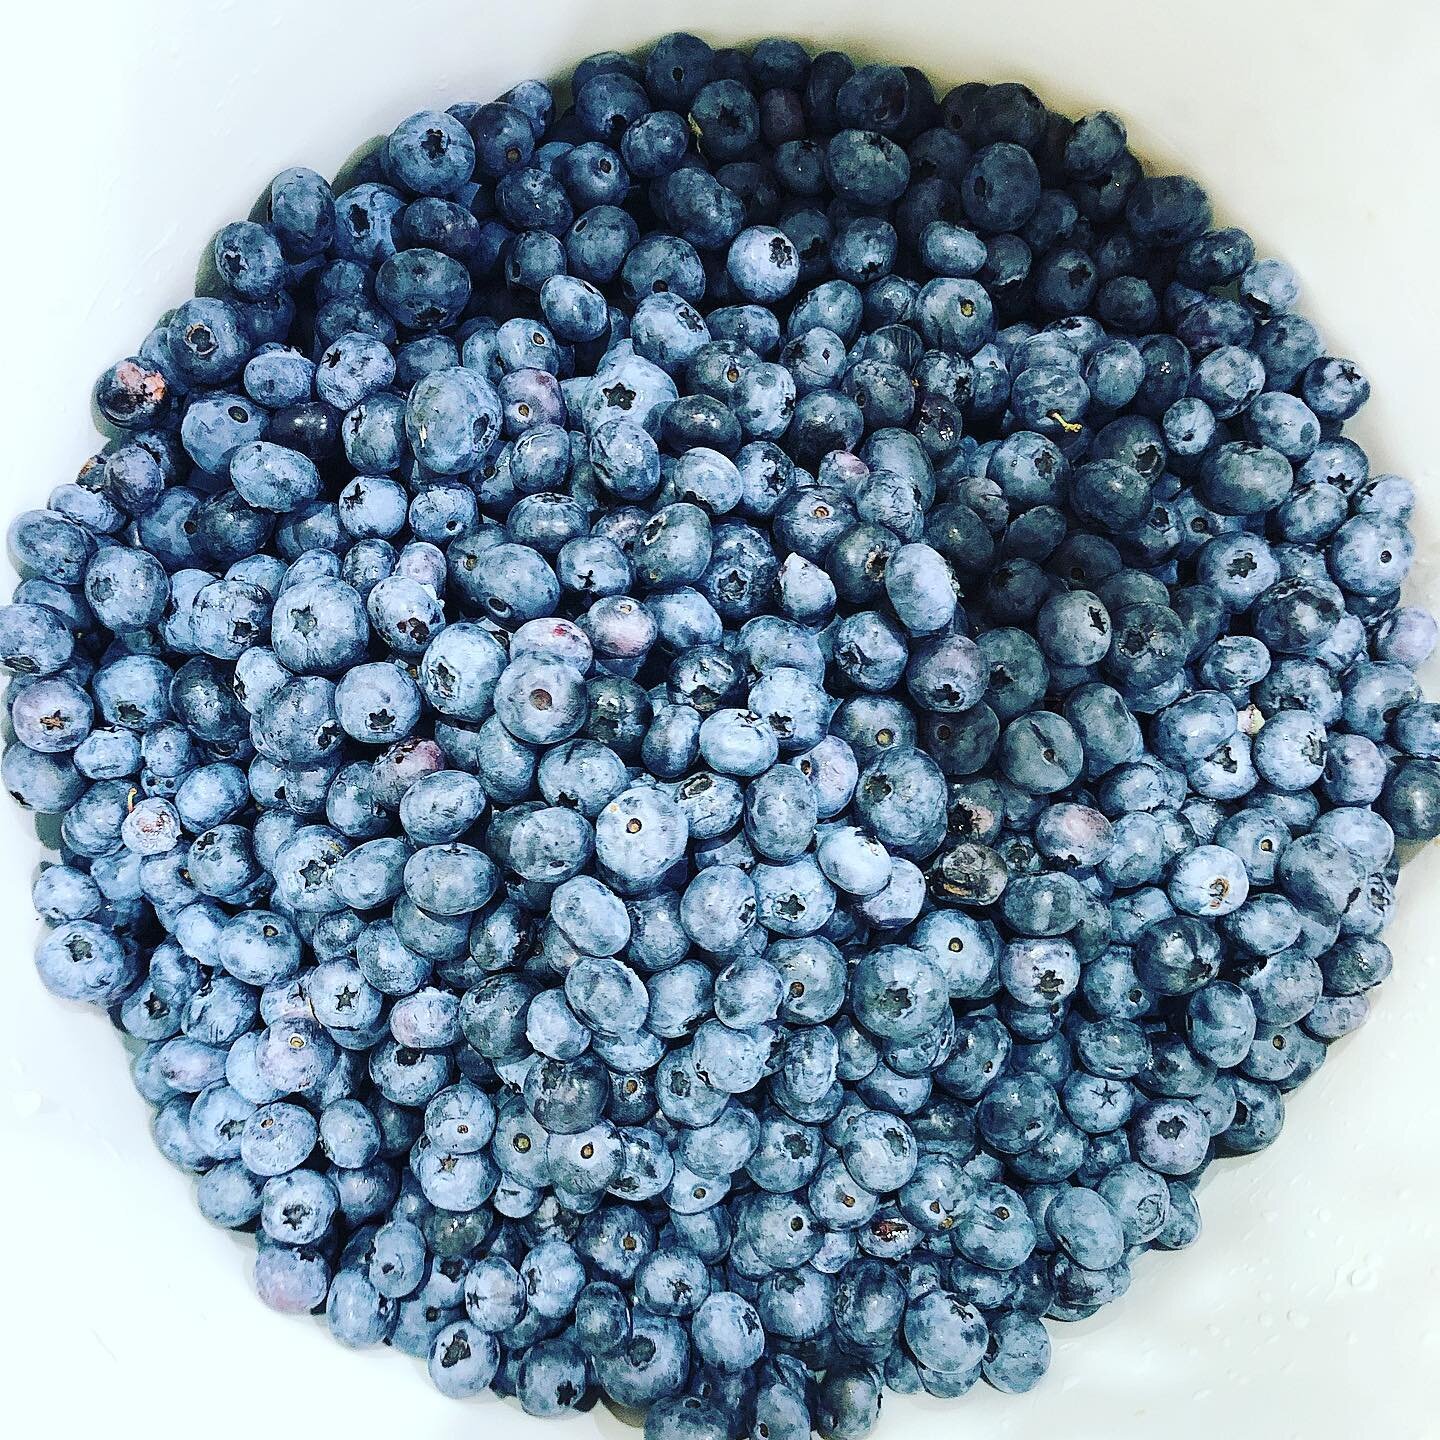 Big Blue Ball of Blueberries 🫐 continuing our tradition of following the fruit. These super sweet local berries came from @hillviewbluberries today, and will be turned into blueberry brandy in the coming weeks! We are so fortunate to have such diver